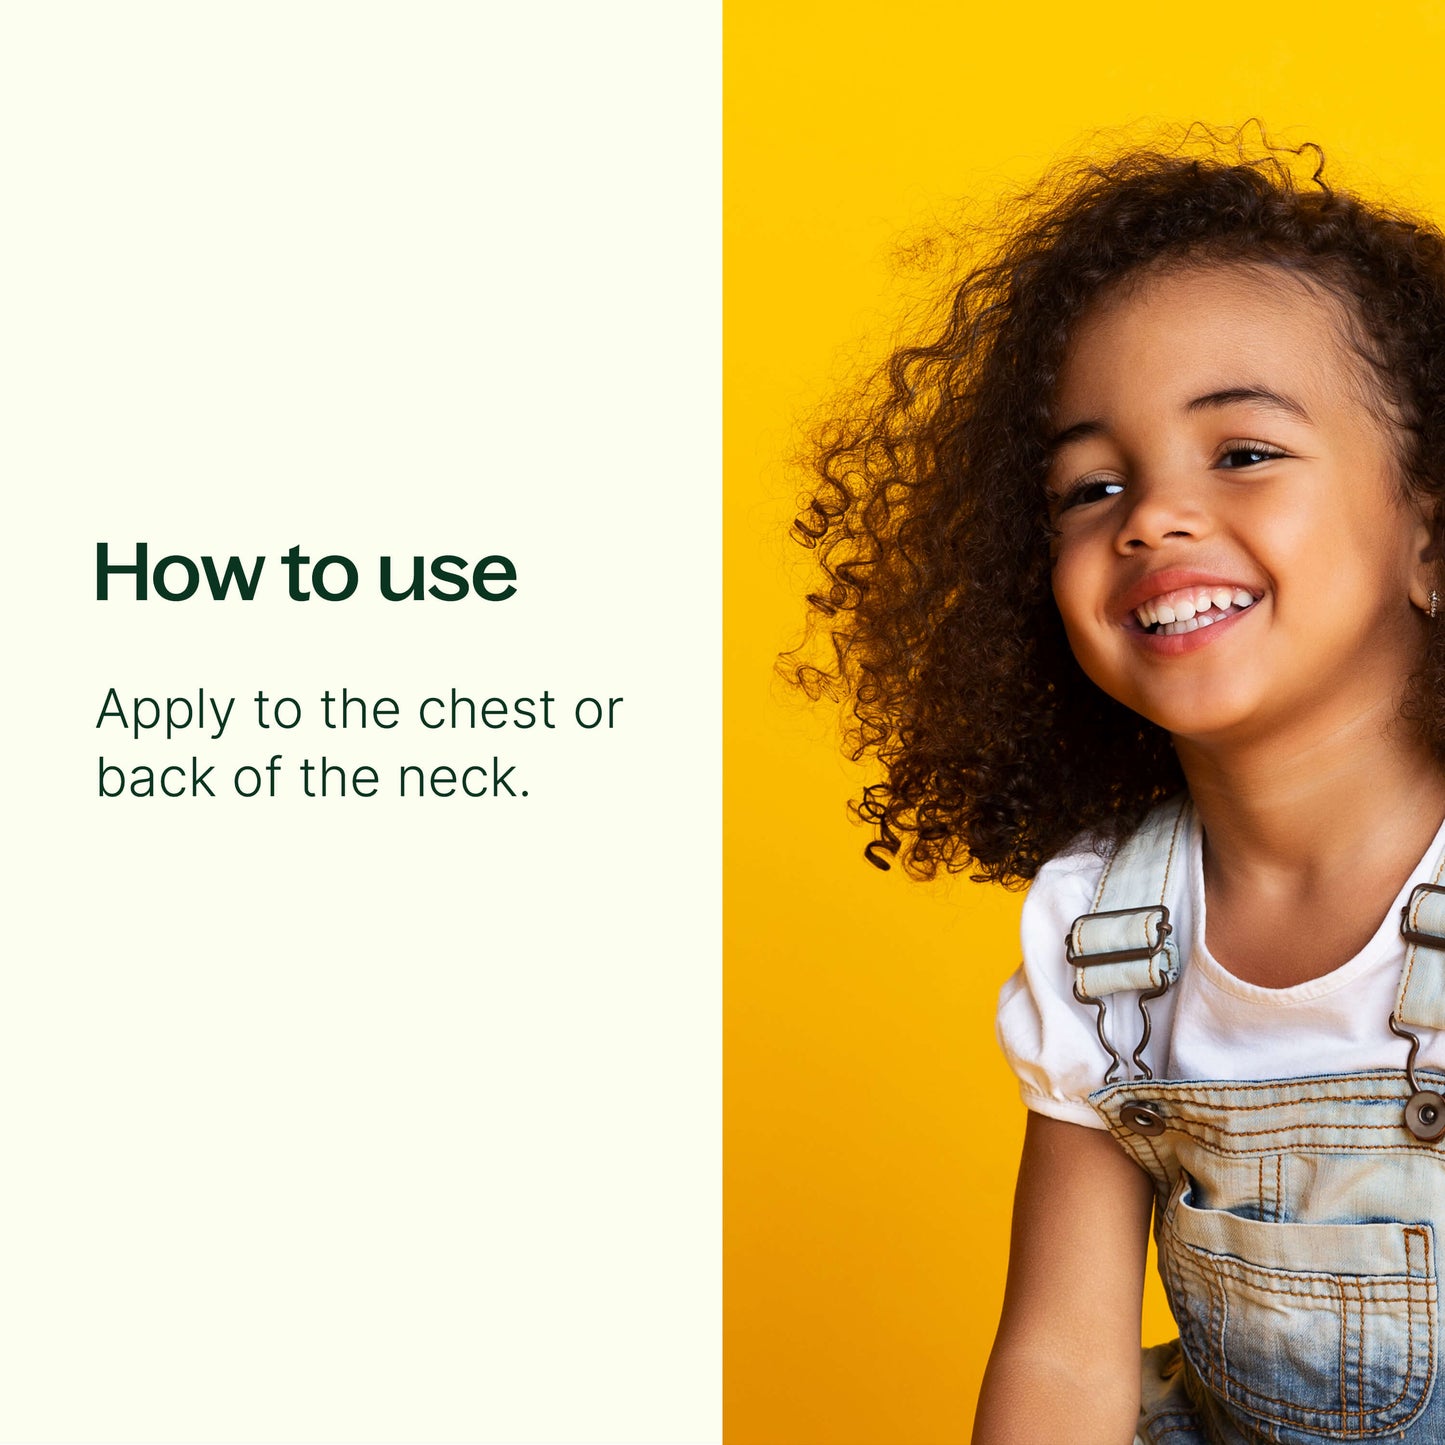 How to Use Calming the Child KidSafe Essential Oil Pre-Diluted Roll-On: Apply to the check or back of the neck